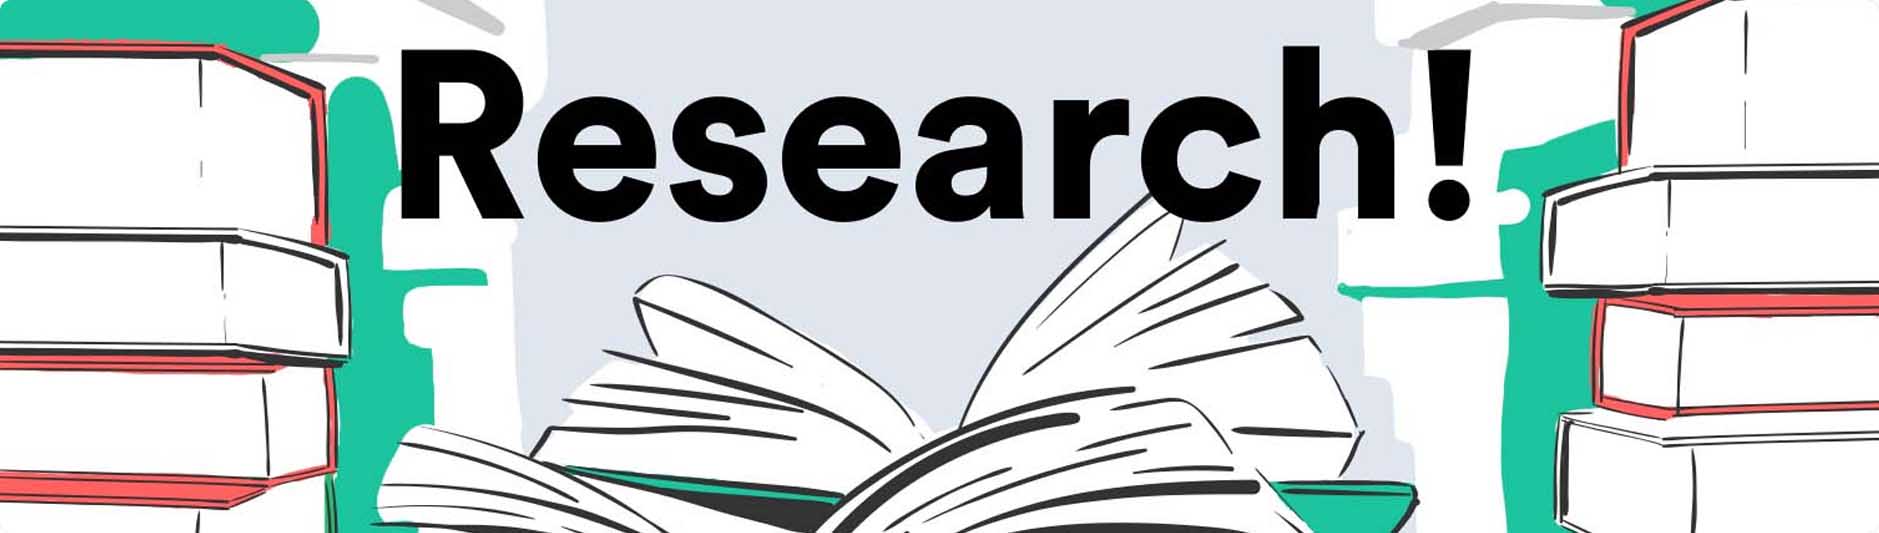 Research writing agencies